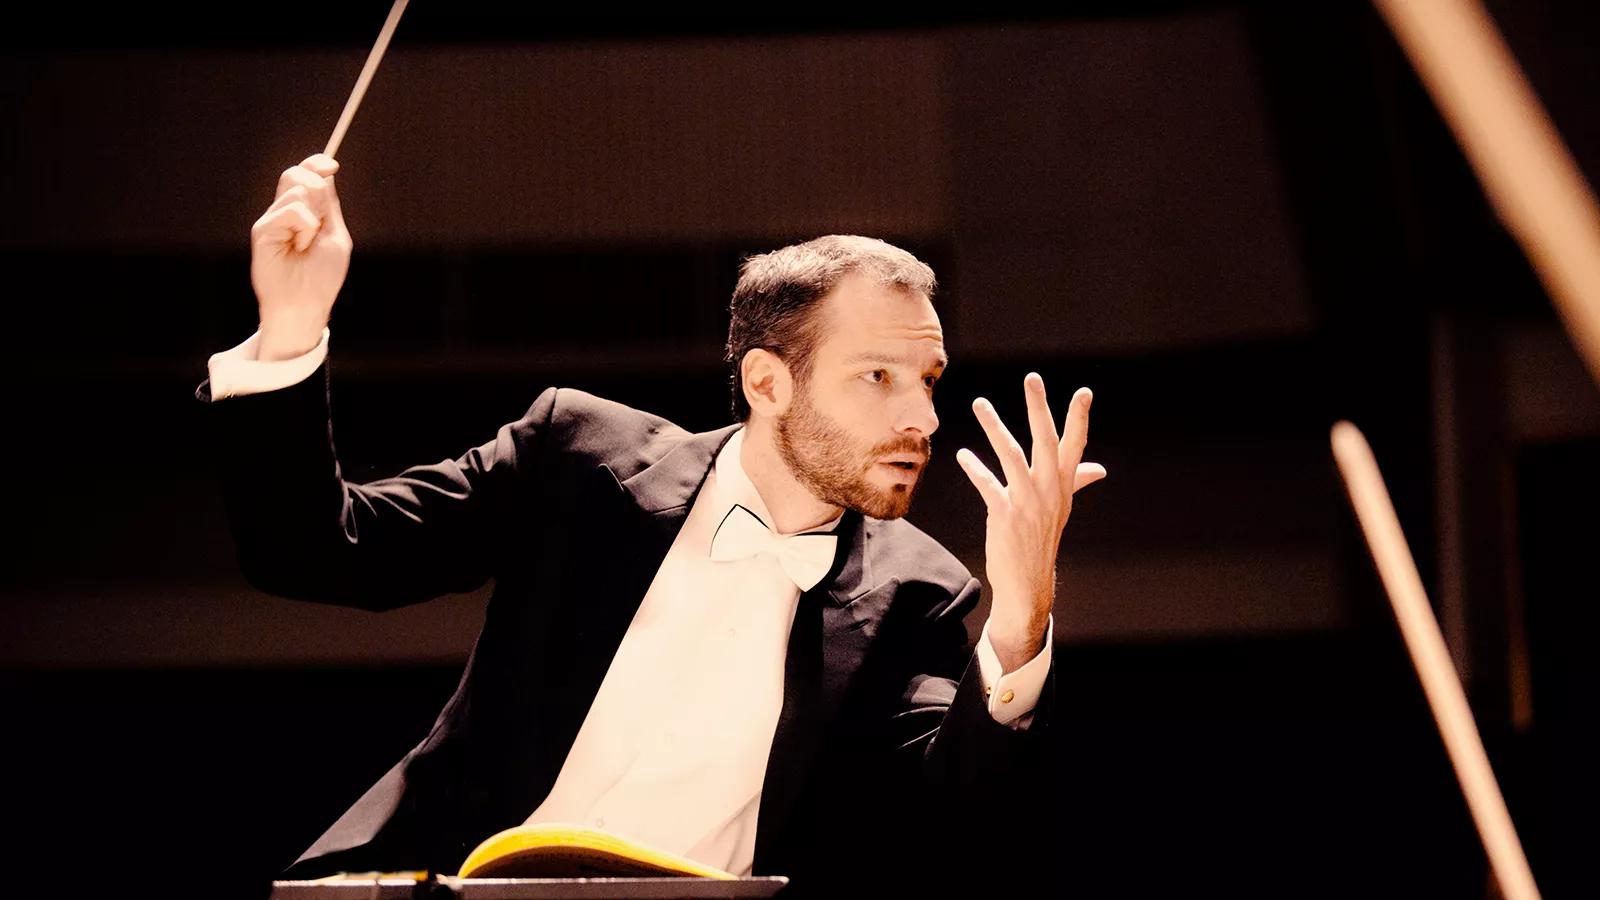 Orchestra conductor. Conductor. Symphony conductor. Live conductor.